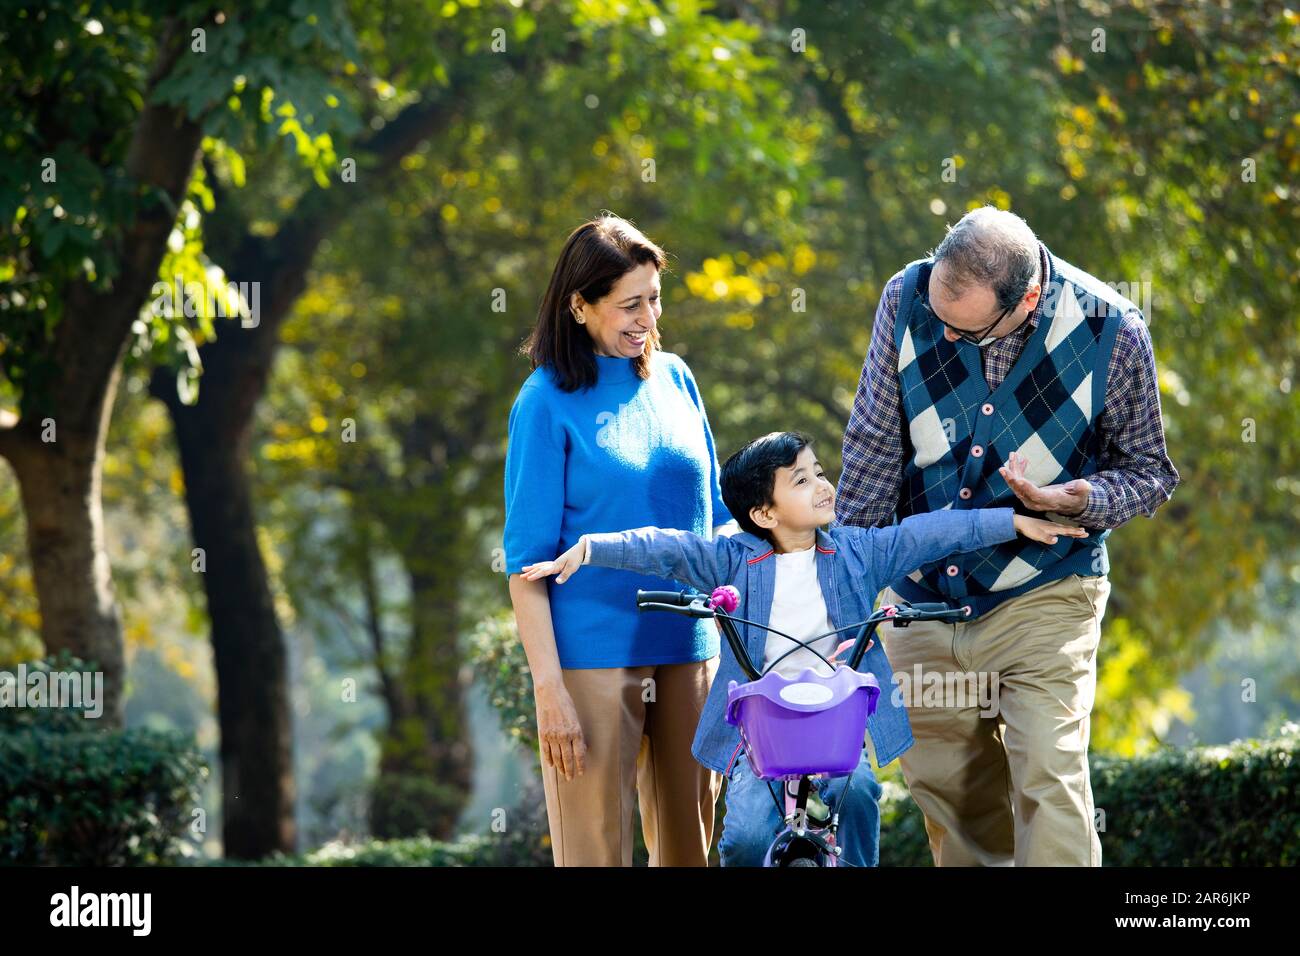 Grandparents with grandson learning to ride bicycle Stock Photo